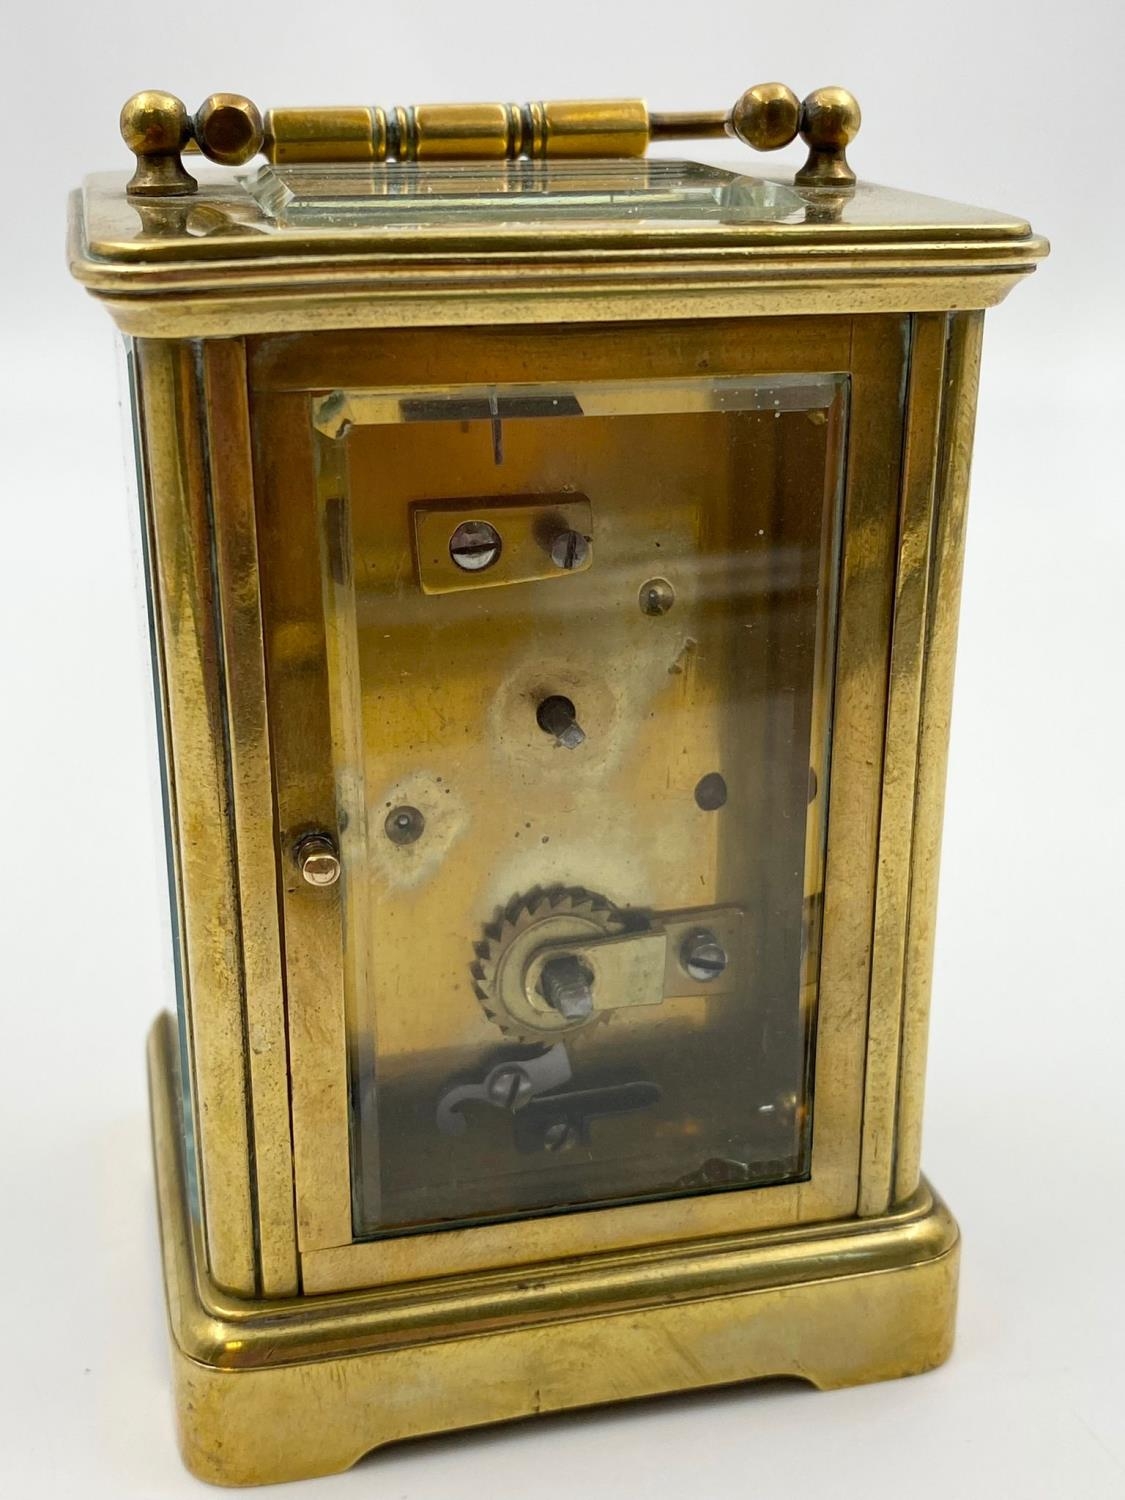 An Antique Brass Carriage Clock. In working order. 11cm tall - Image 3 of 5